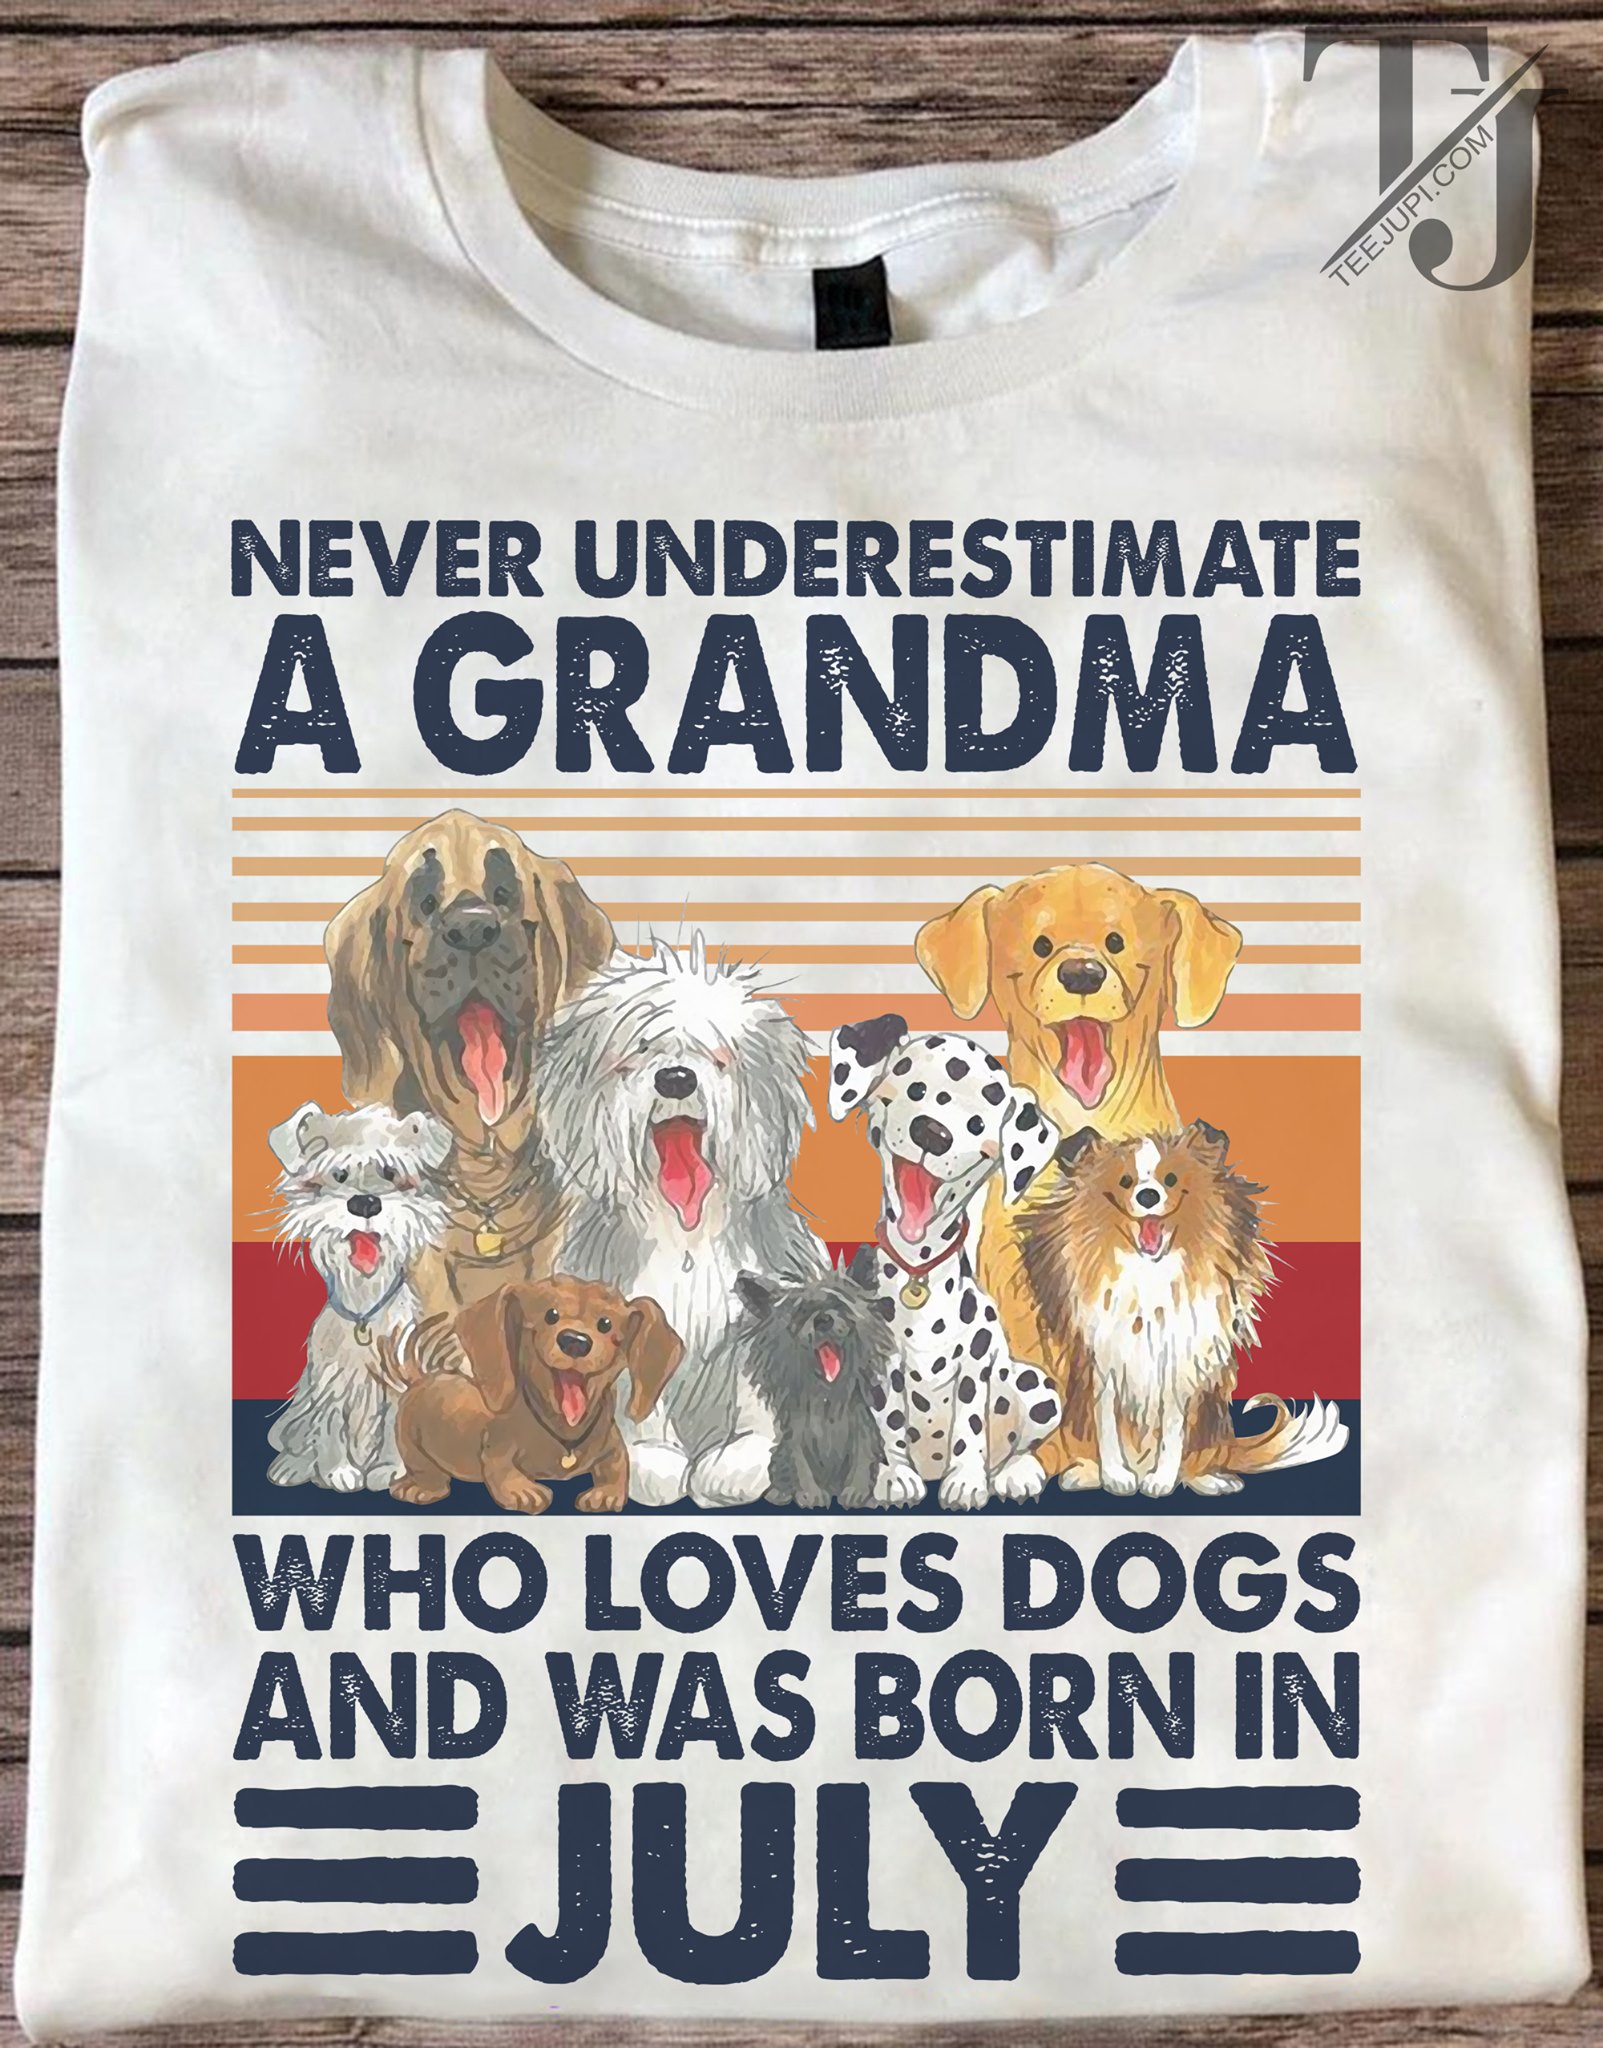 Never underestimate a grandma who loves dogs and was born in July